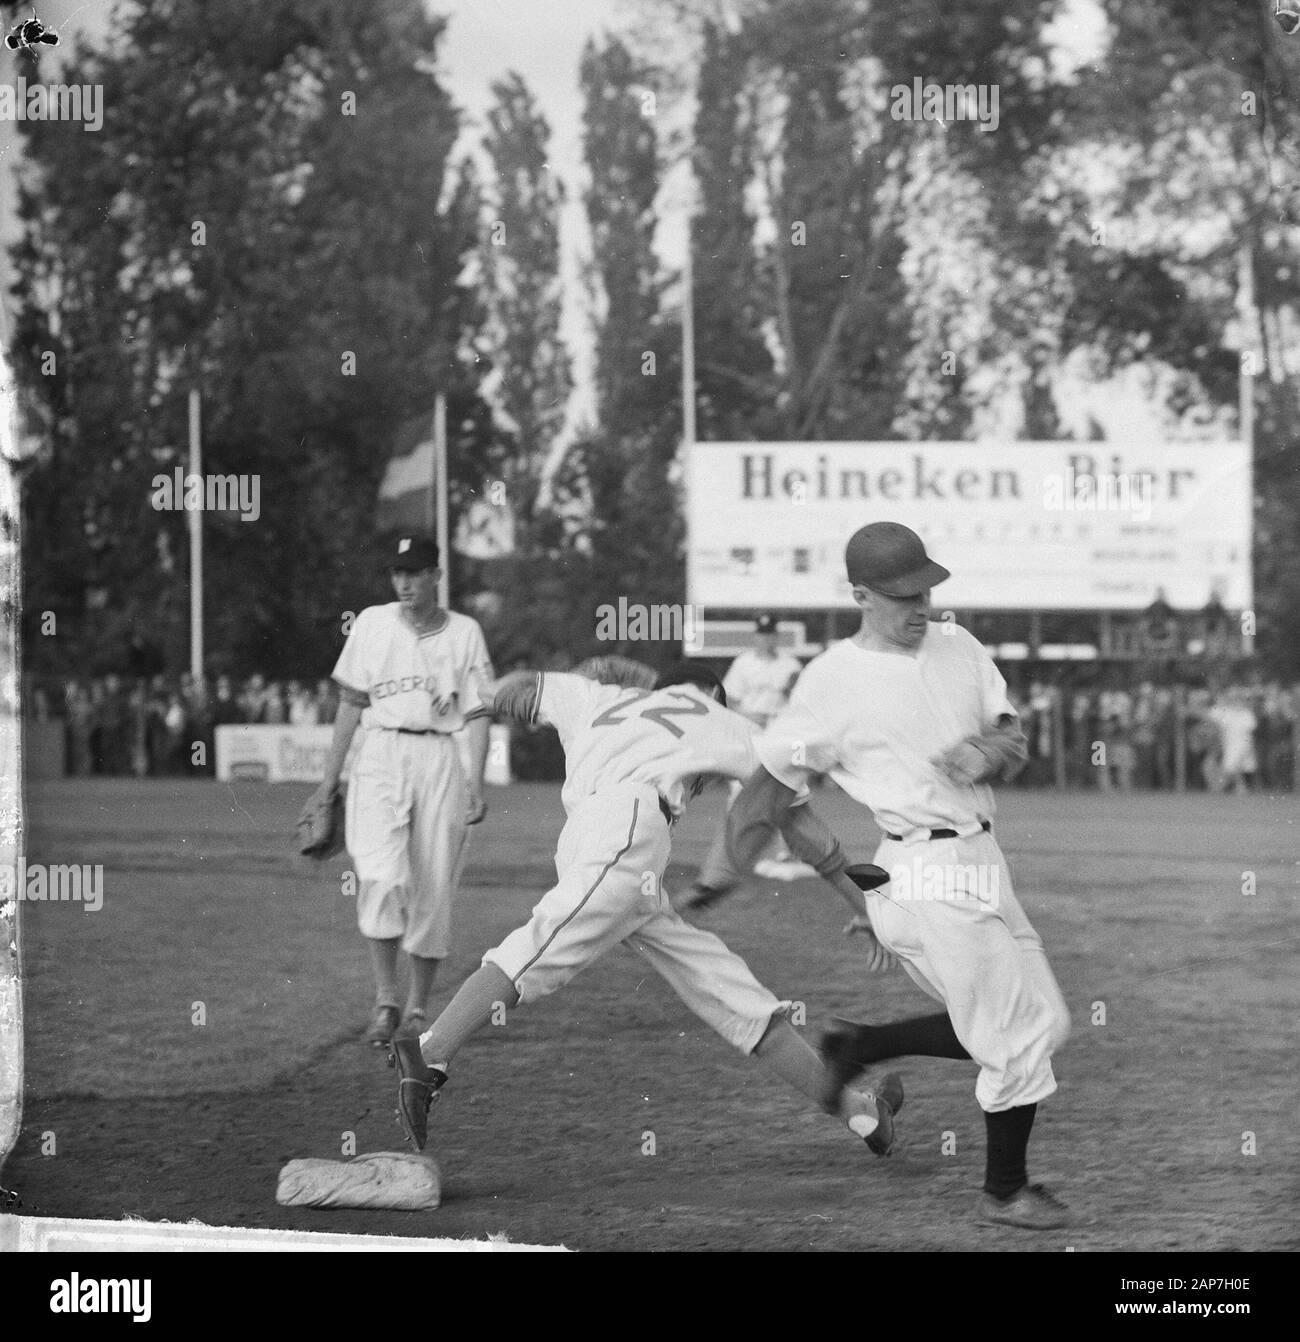 The French baseball player caught by Hoffmann (number 22 European Baseball Championships Date: 22 July 1962 Keywords: Baseball Personname: HOFFMANN Stock Photo